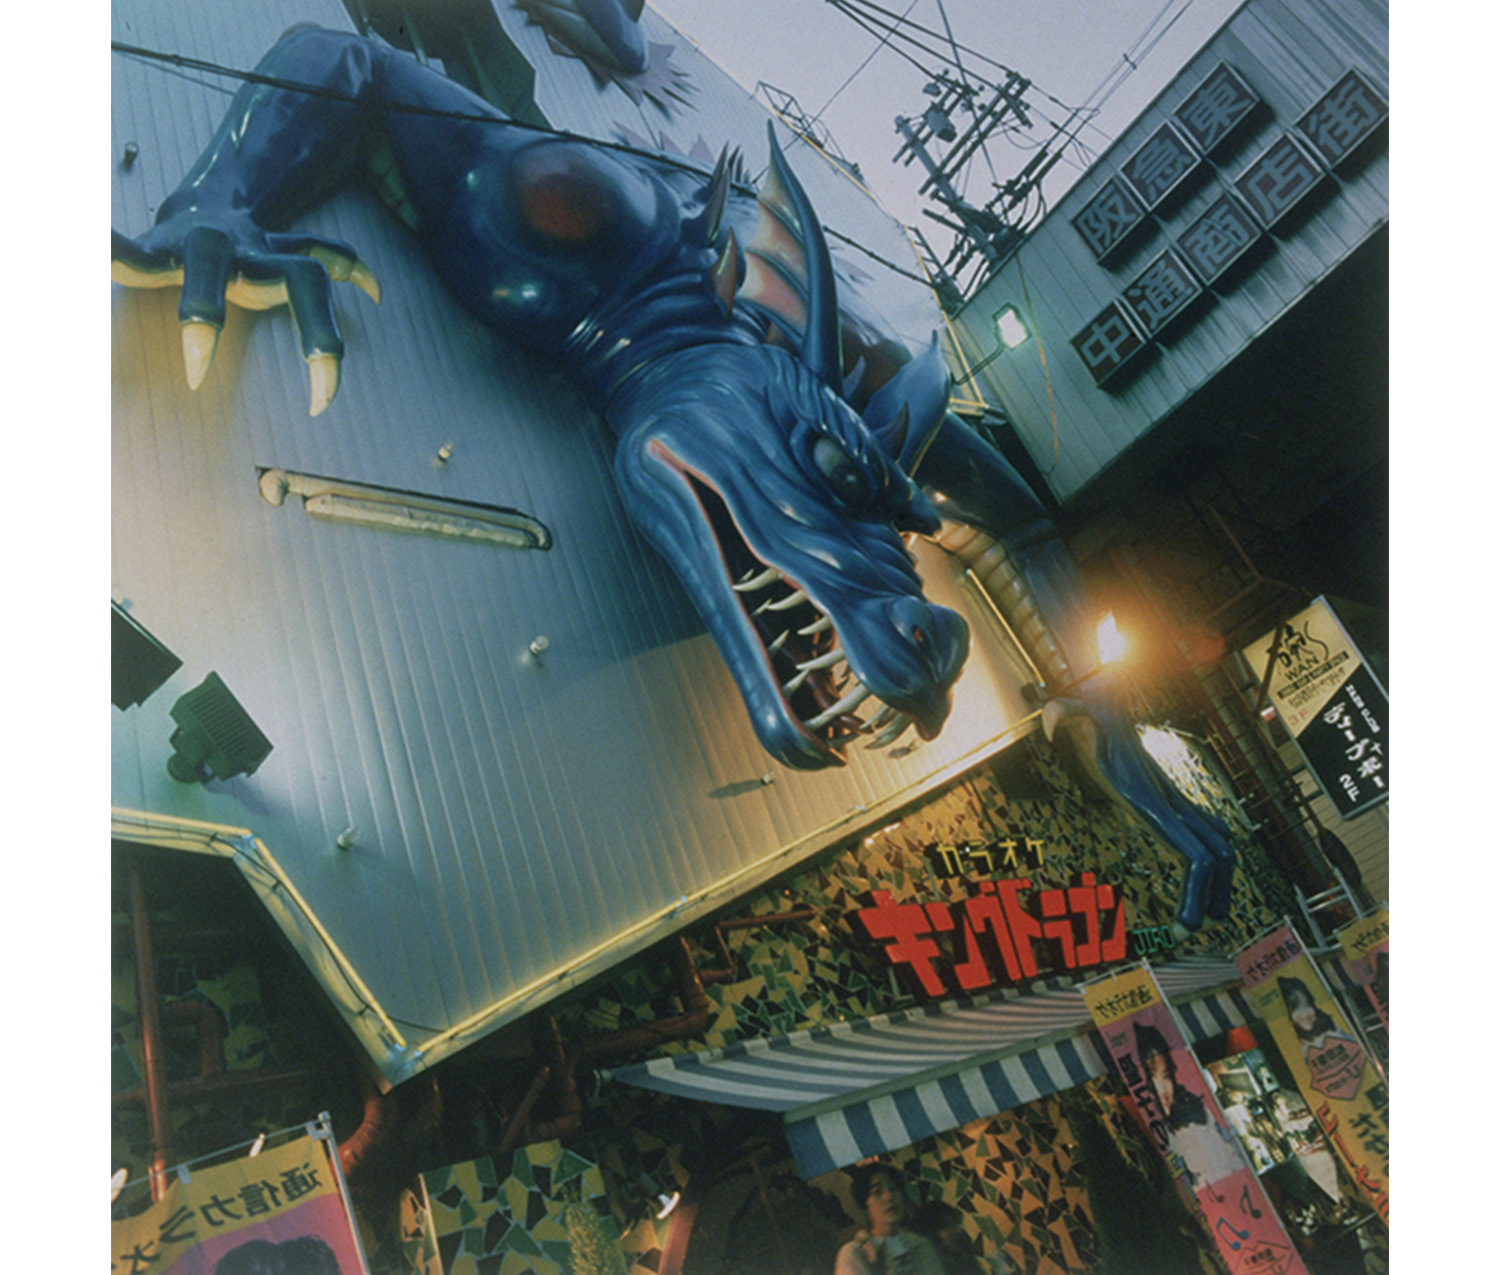 elaborately decorated modern building with blue and white striped awning, and giant blue dragon leaning down over front of building; several signs in Japanese